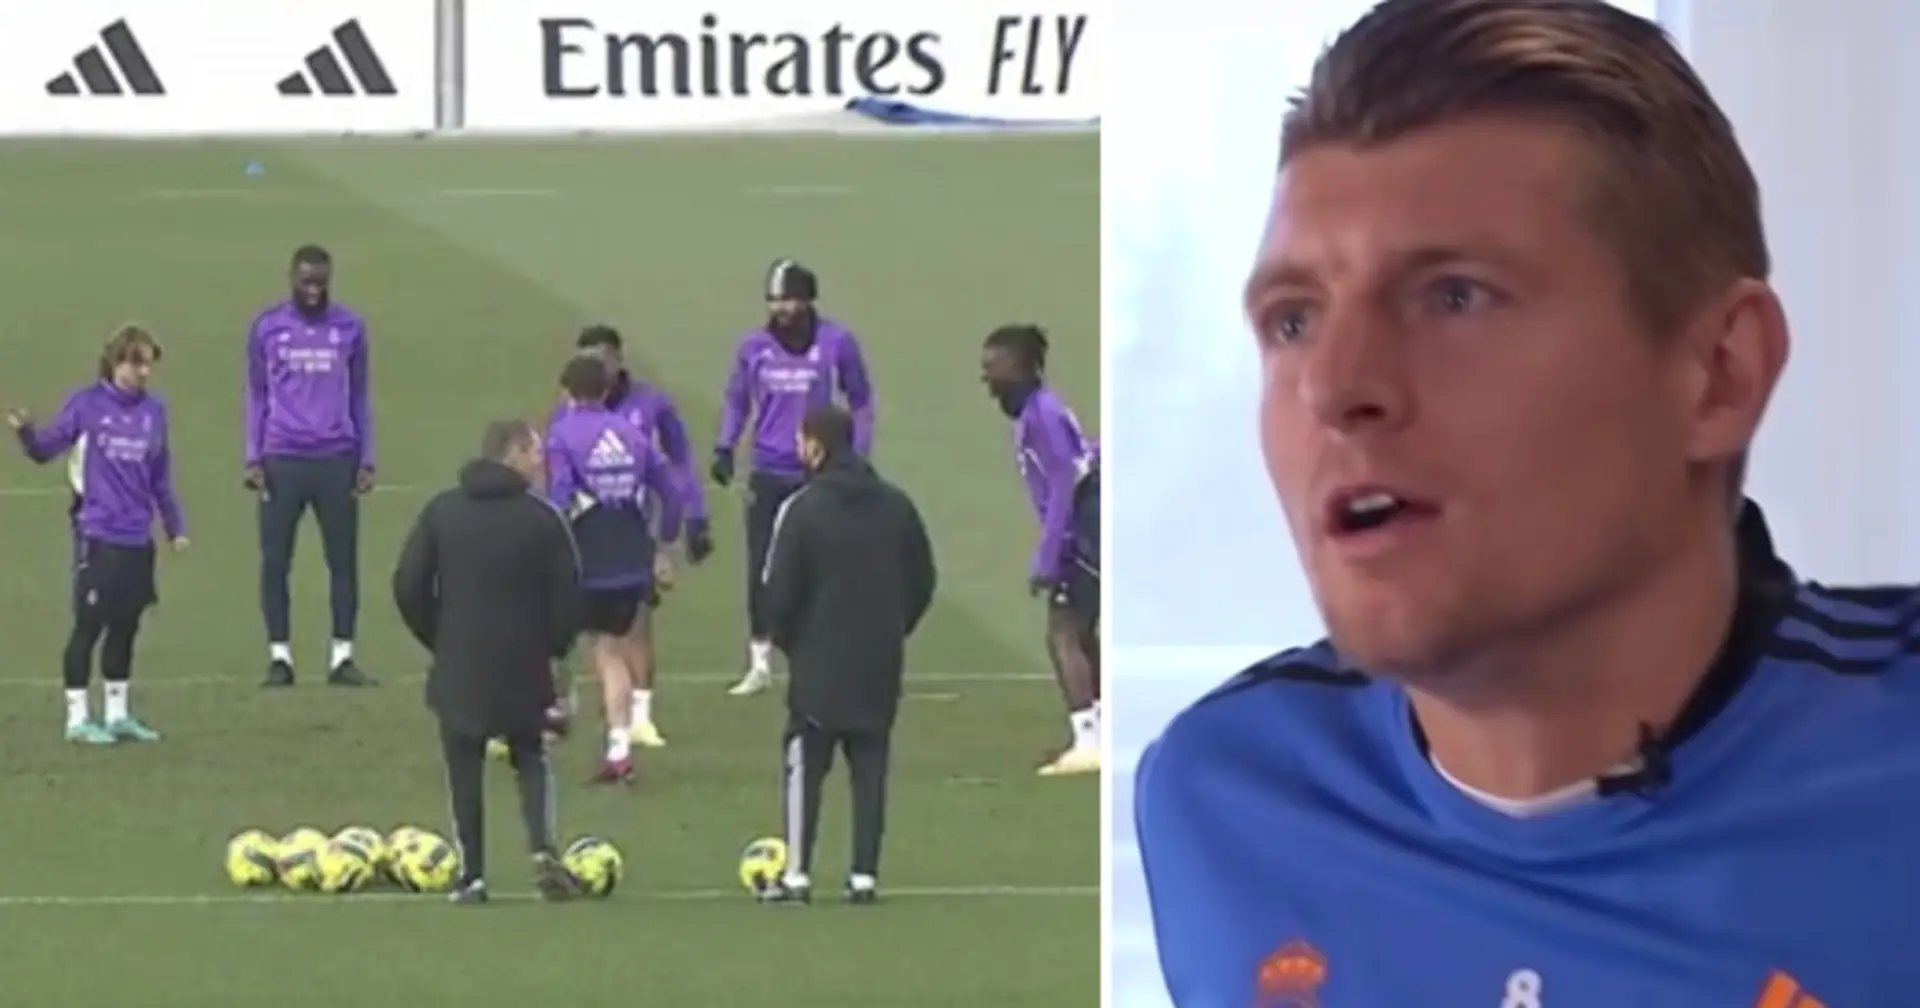 Kroos misses training, Courtois back: latest injury report